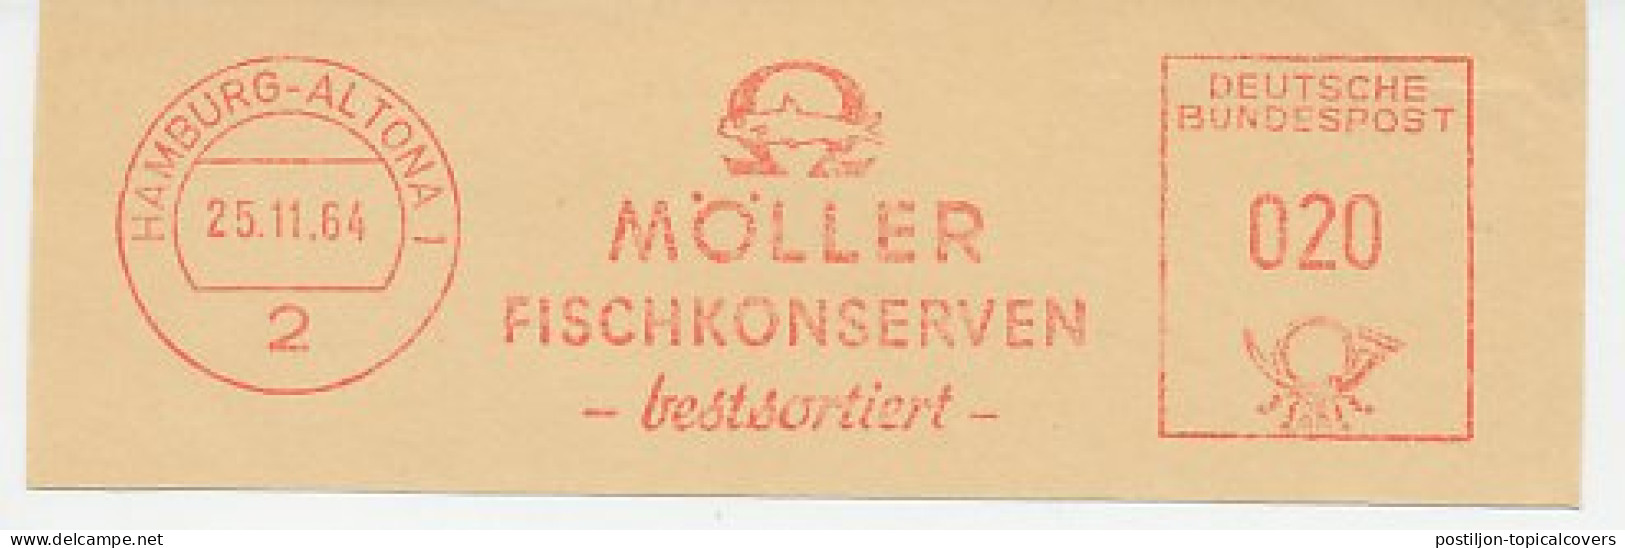 Meter Cut Germany 1964 Tinned Fish - Fische